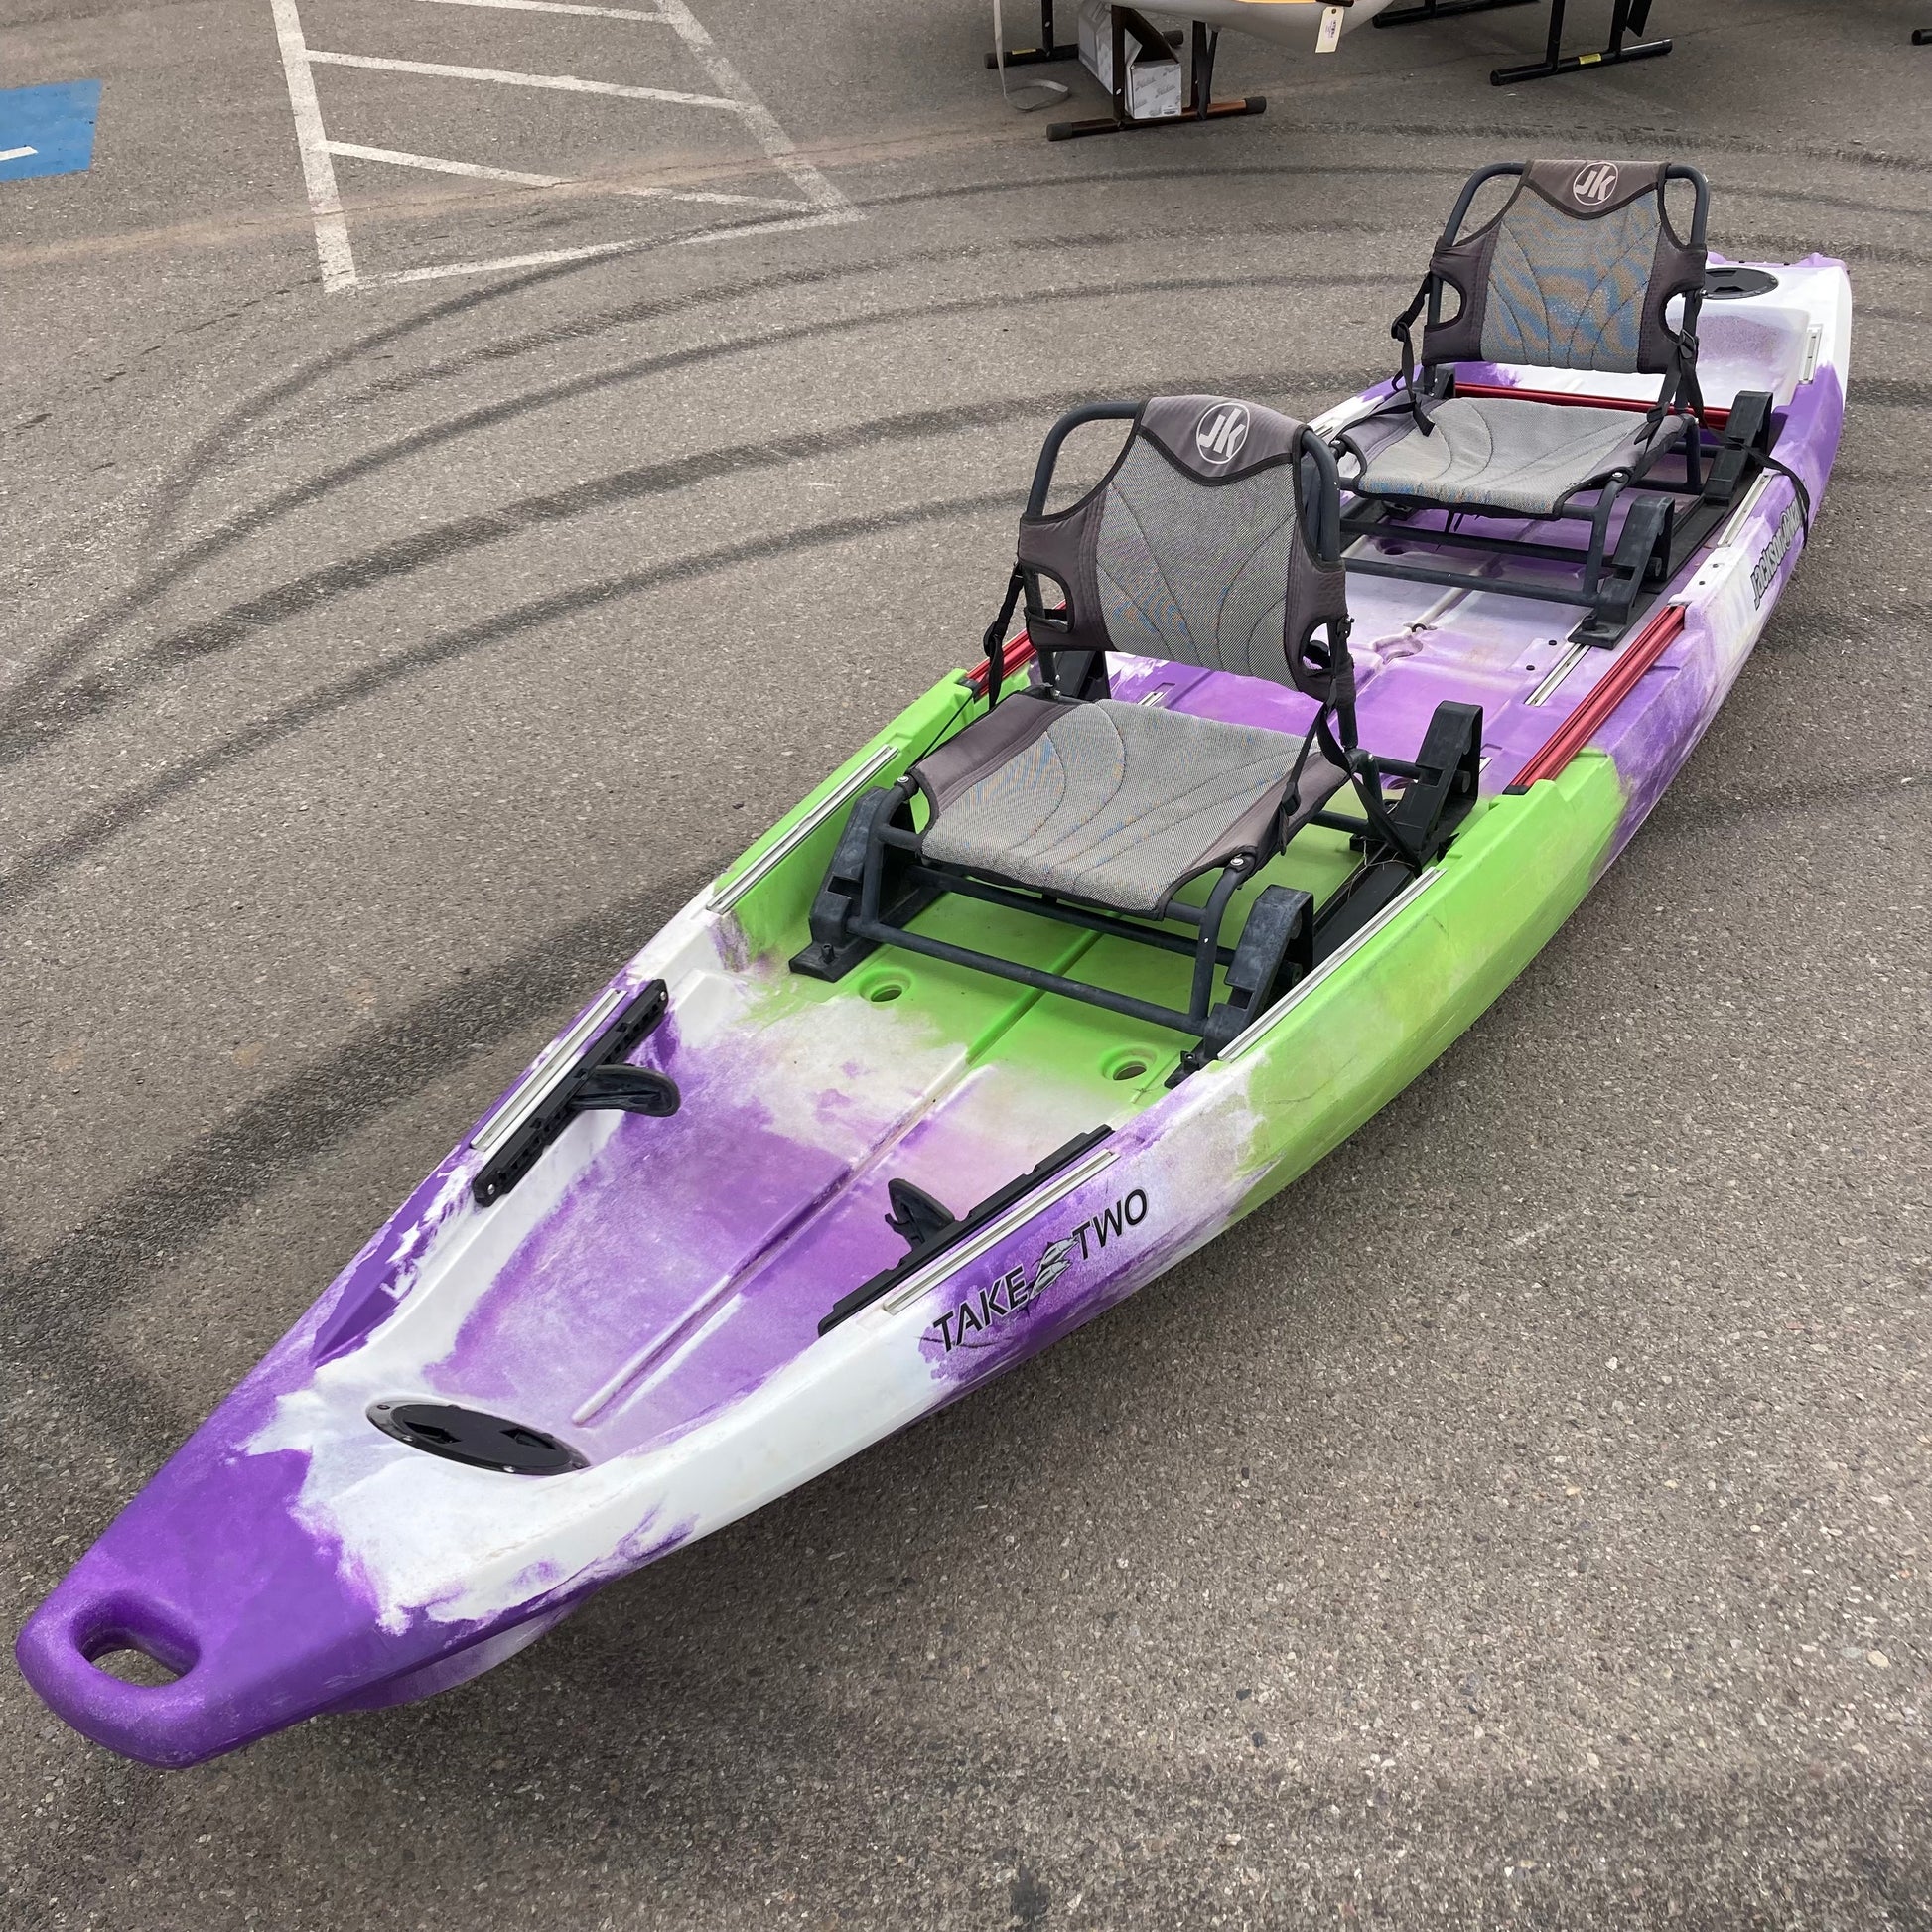 A purple and green Demo TakeTwo kayak is parked in a parking lot, branded by Jackson Kayak.